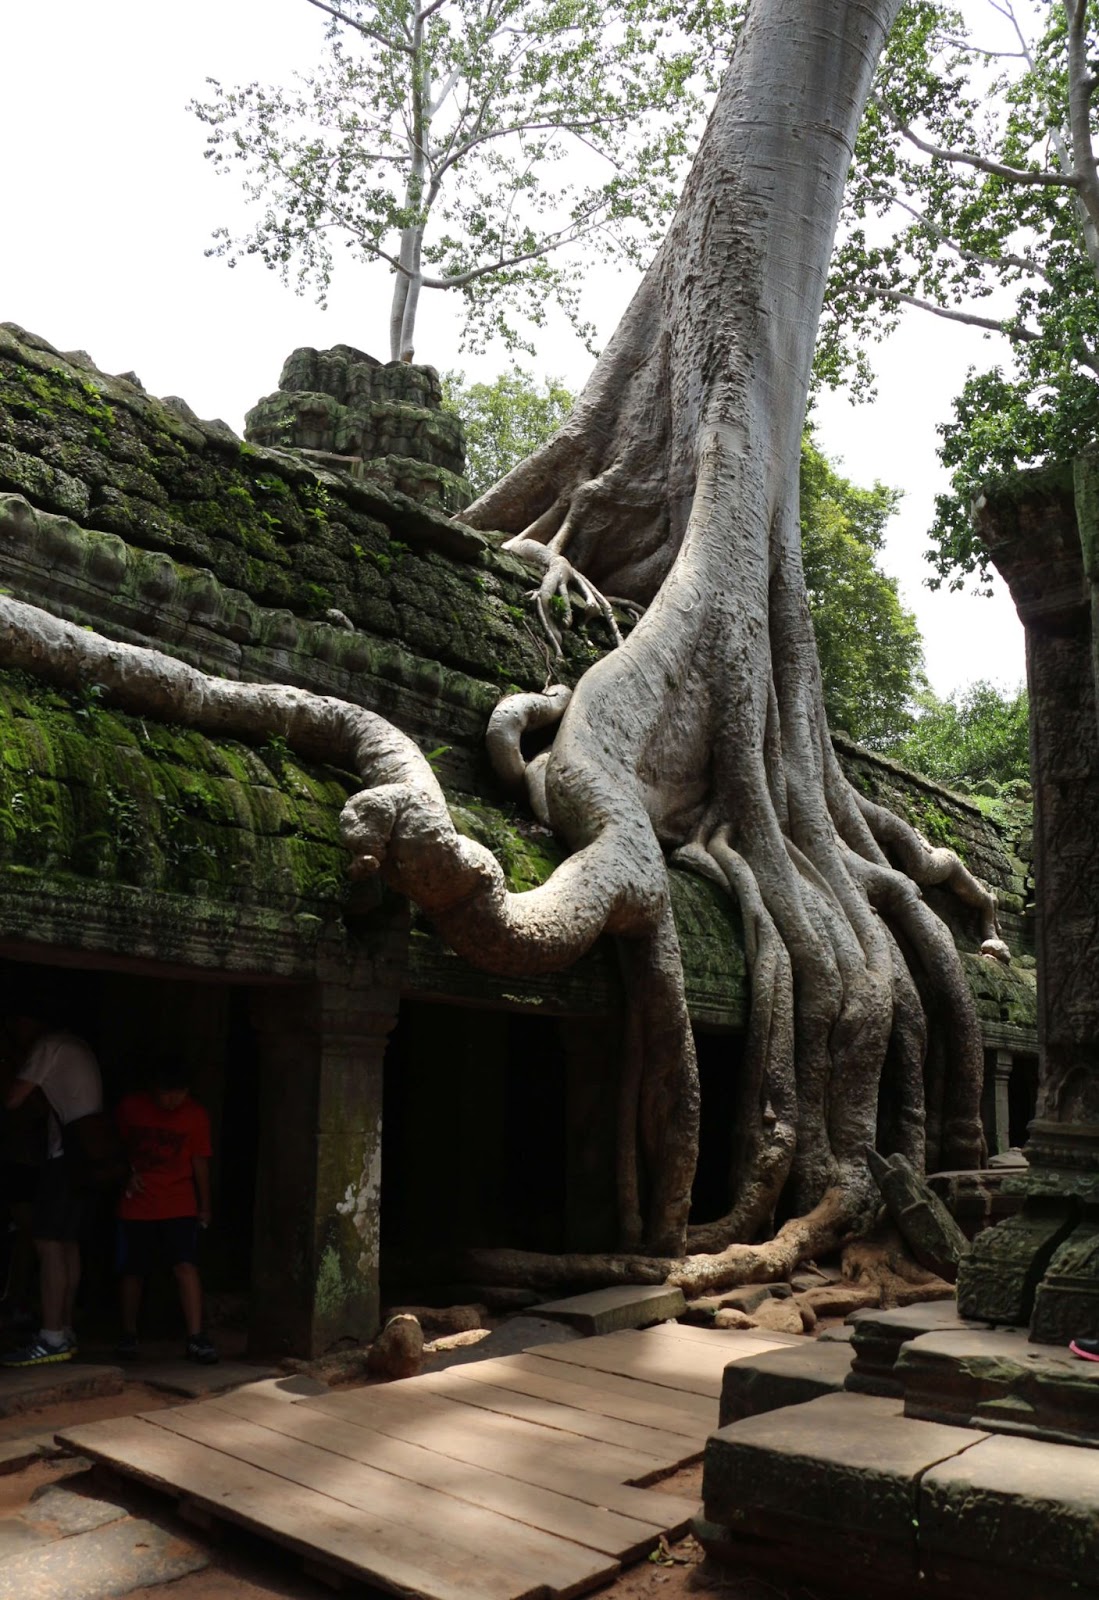 This is one of the roots that have taken over the gallery at Ta Prohm.